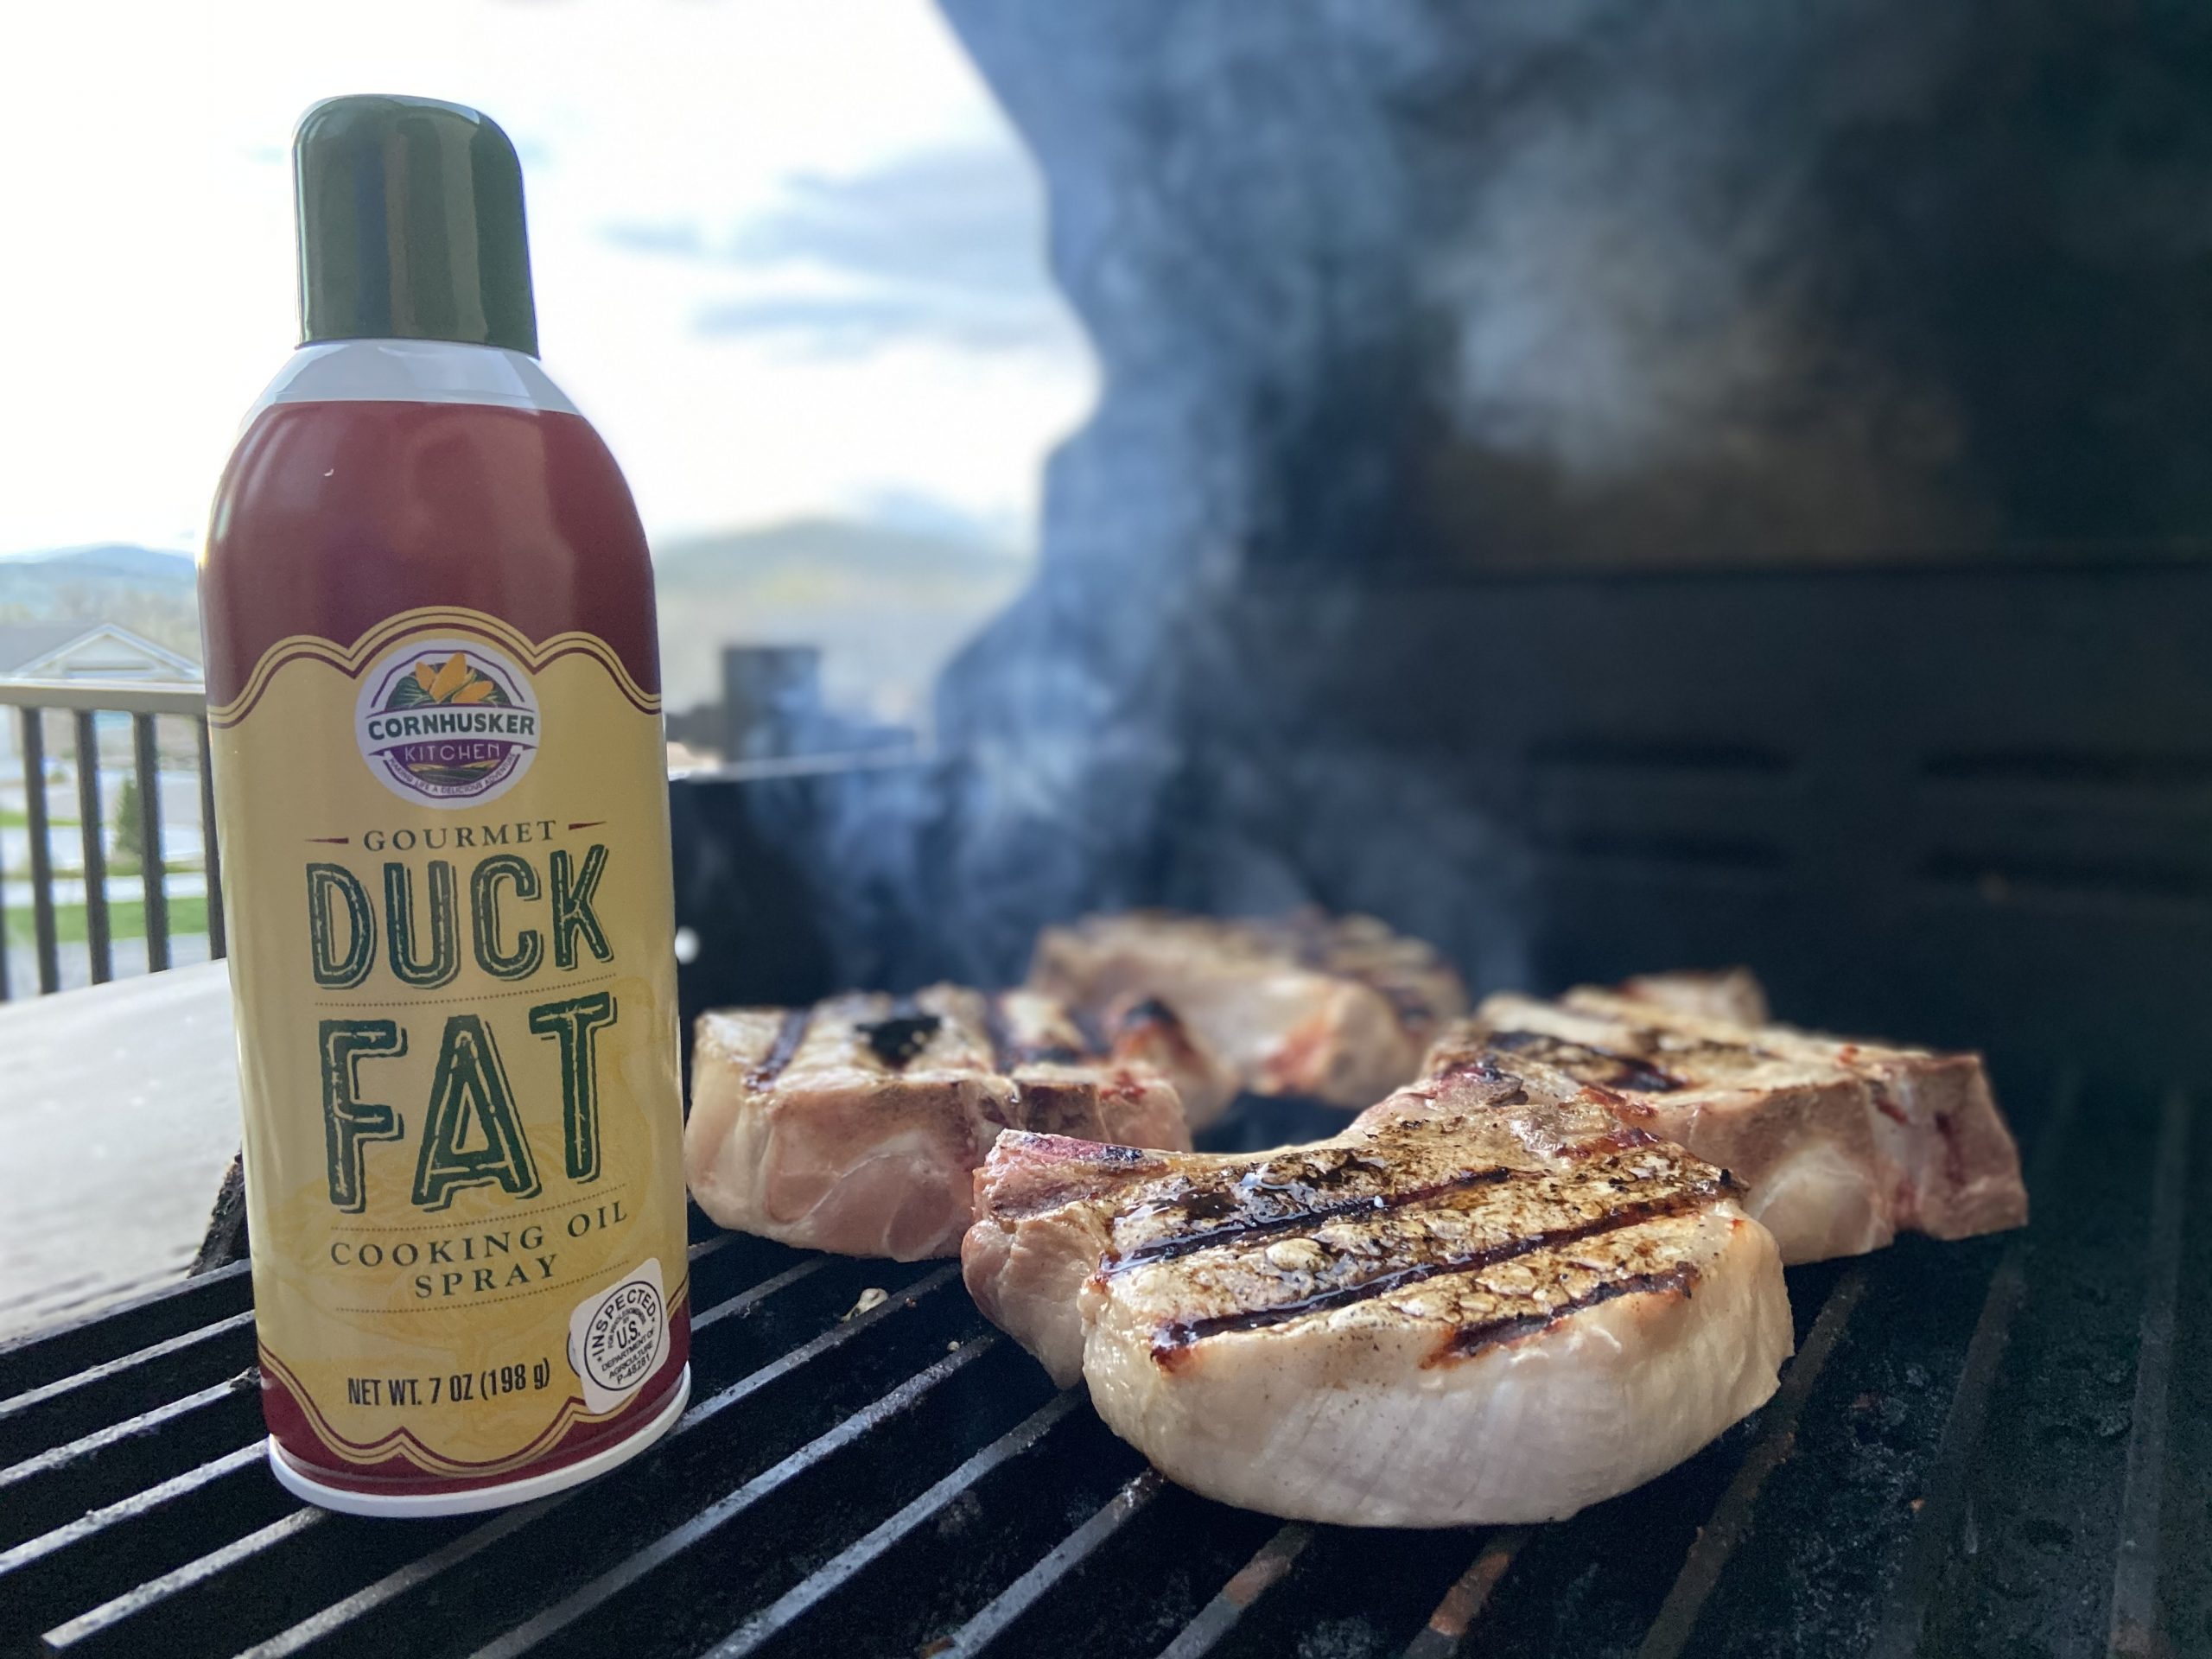 https://tailgating-challenge.com/wp-content/uploads/2021/05/duck-fat-spray-review-scaled.jpeg